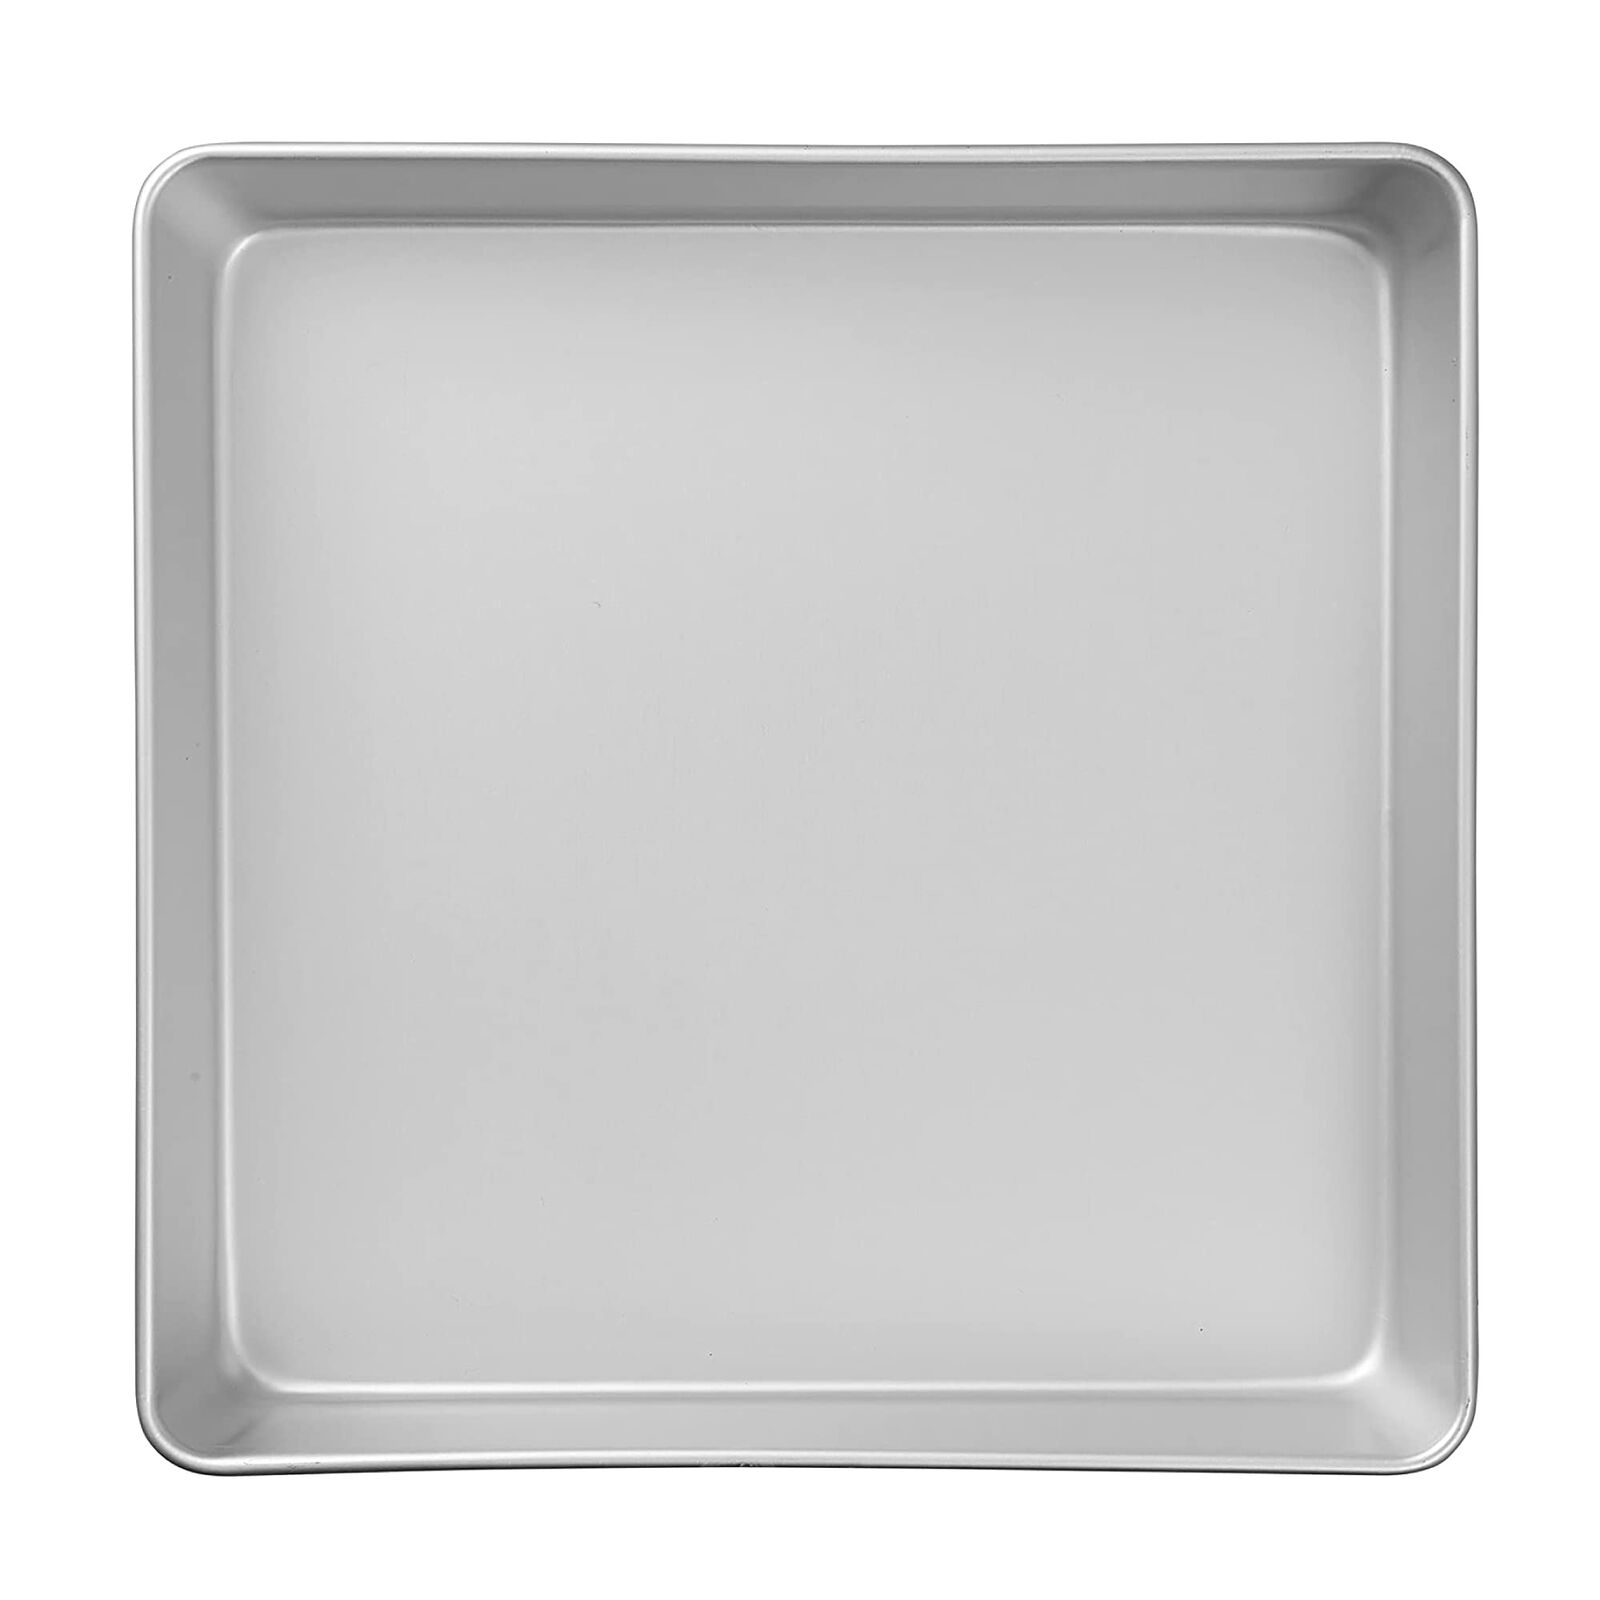 Performance Pans Aluminum Square Brownie and Cake Pan, 12 x 12 inches, Silver